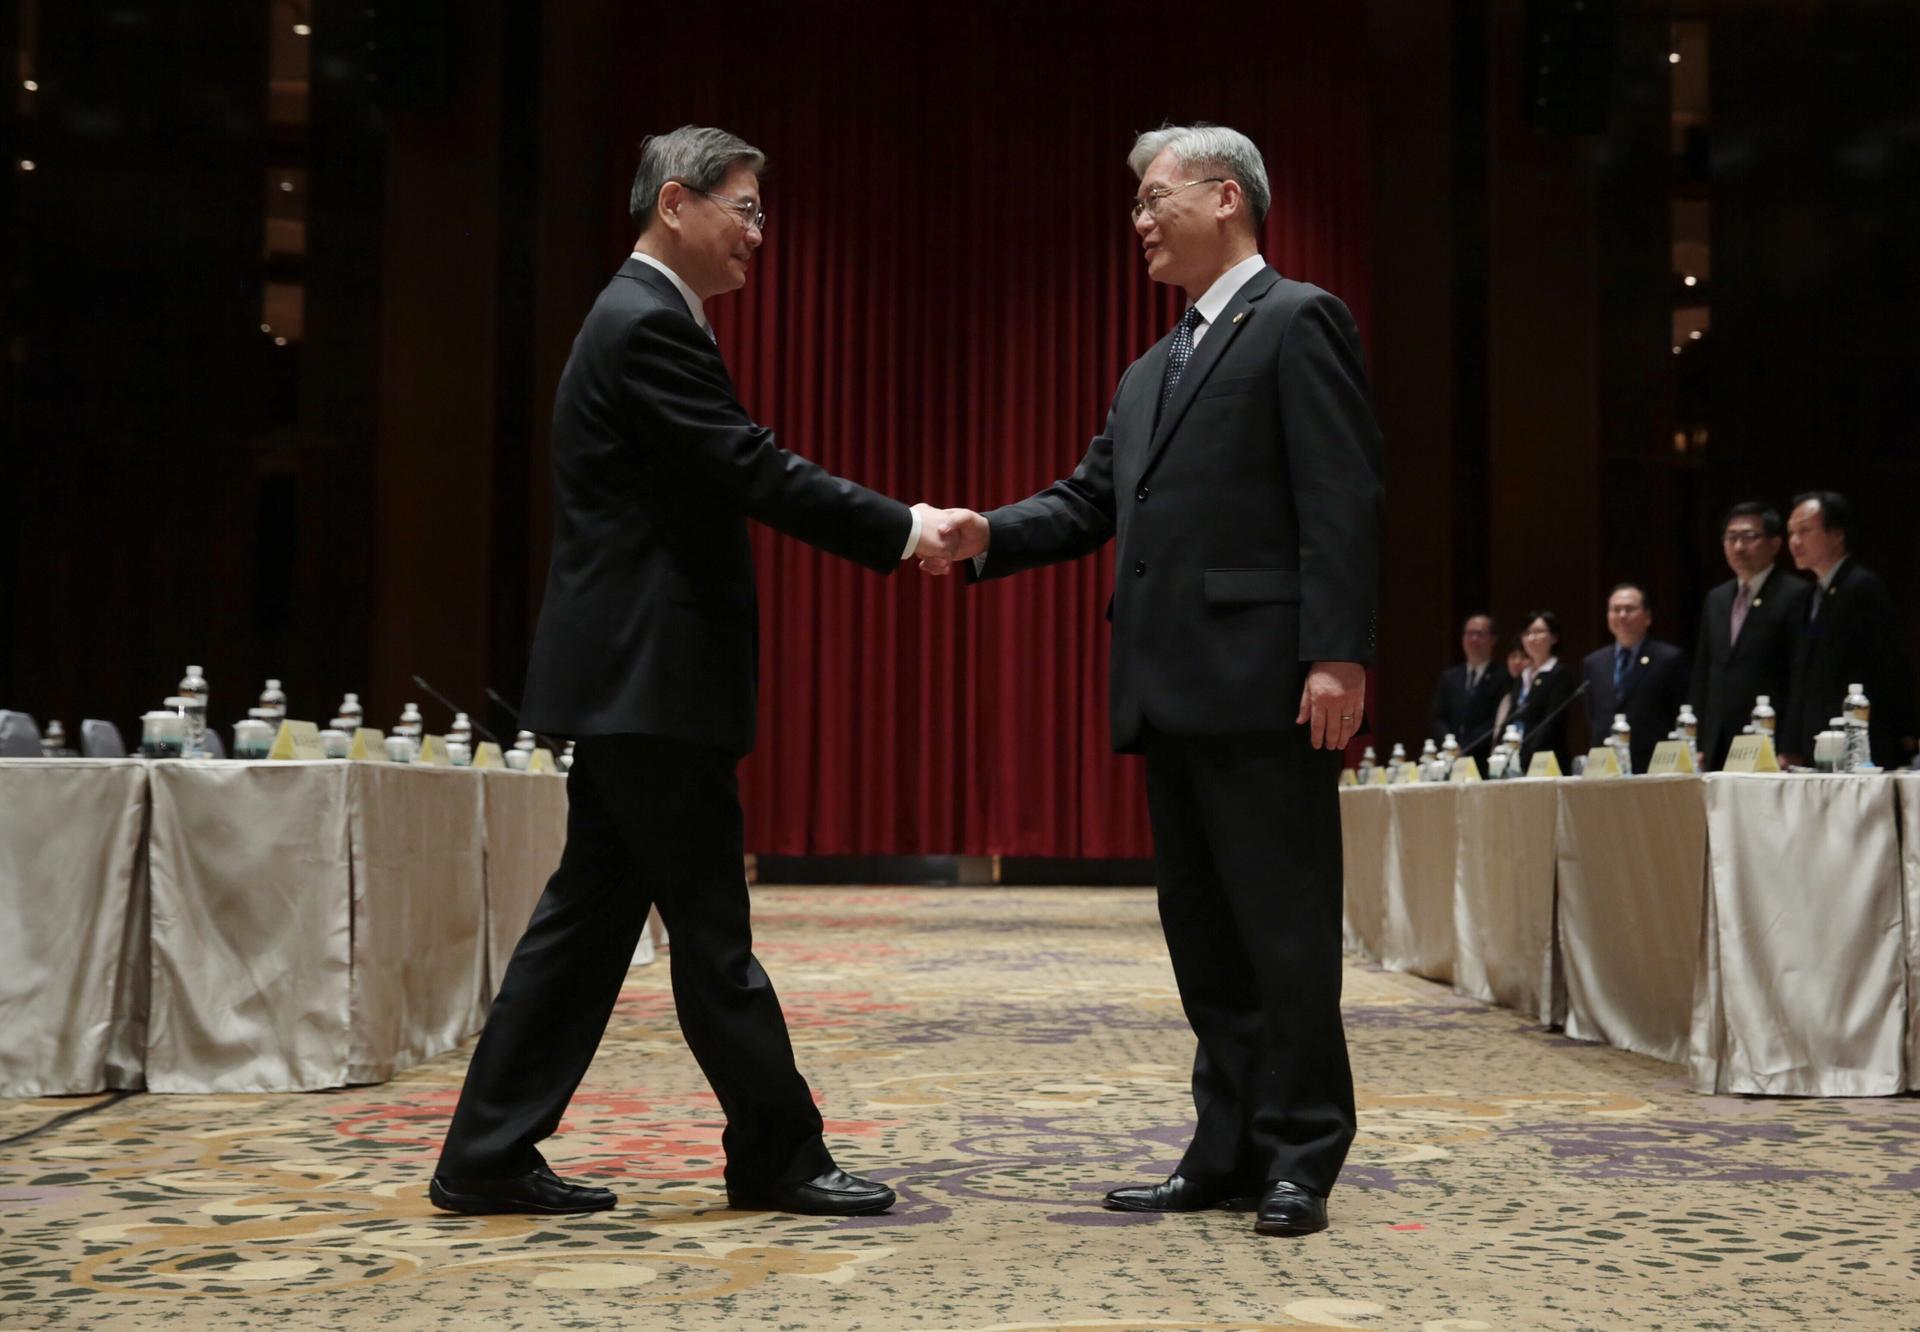 Zhang Zhijun, Beijing's top official on Taiwan, shakes hands with his Taiwanese counterpart, Andrew Hsia Li-yan, head of Taiwan's Mainland Affairs Council. Photo: CNA